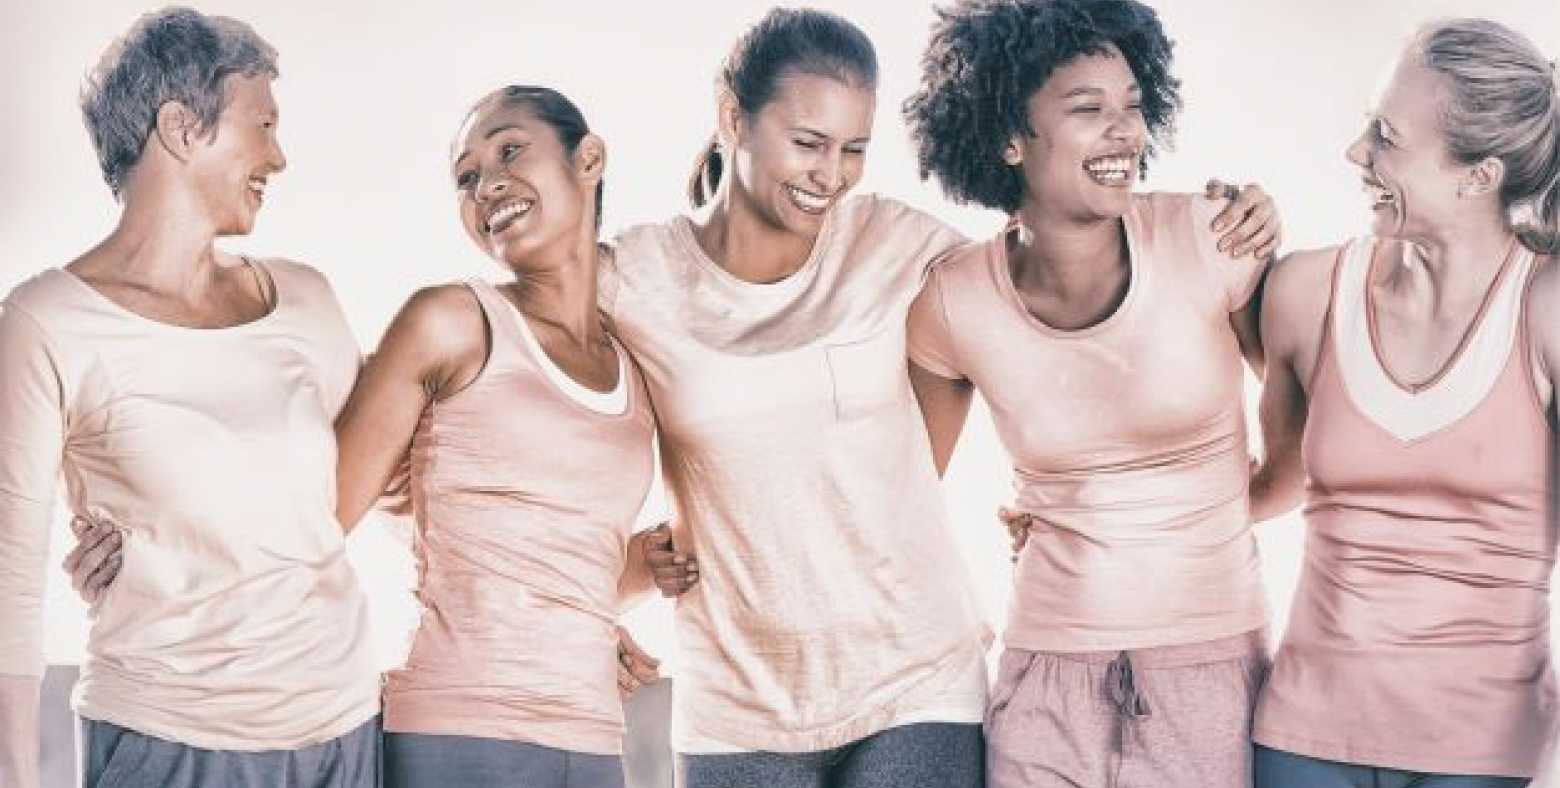 5 women in pink together smiling 